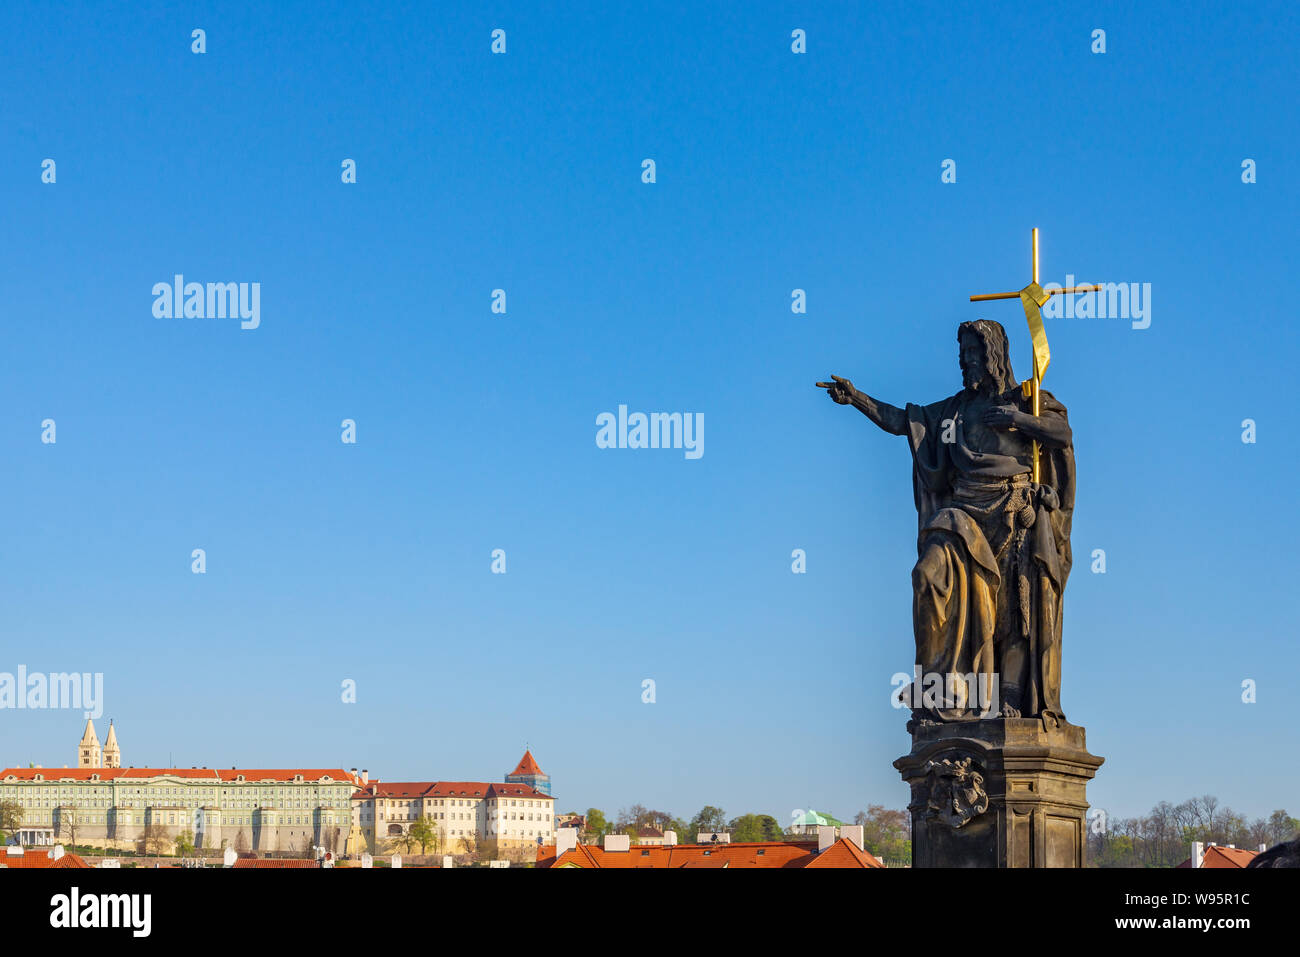 view of Statue of Saint  John the Baptist stand on pedestal and balustrades of Charles Bridge over Vltava river and background of Praha Castle. Stock Photo